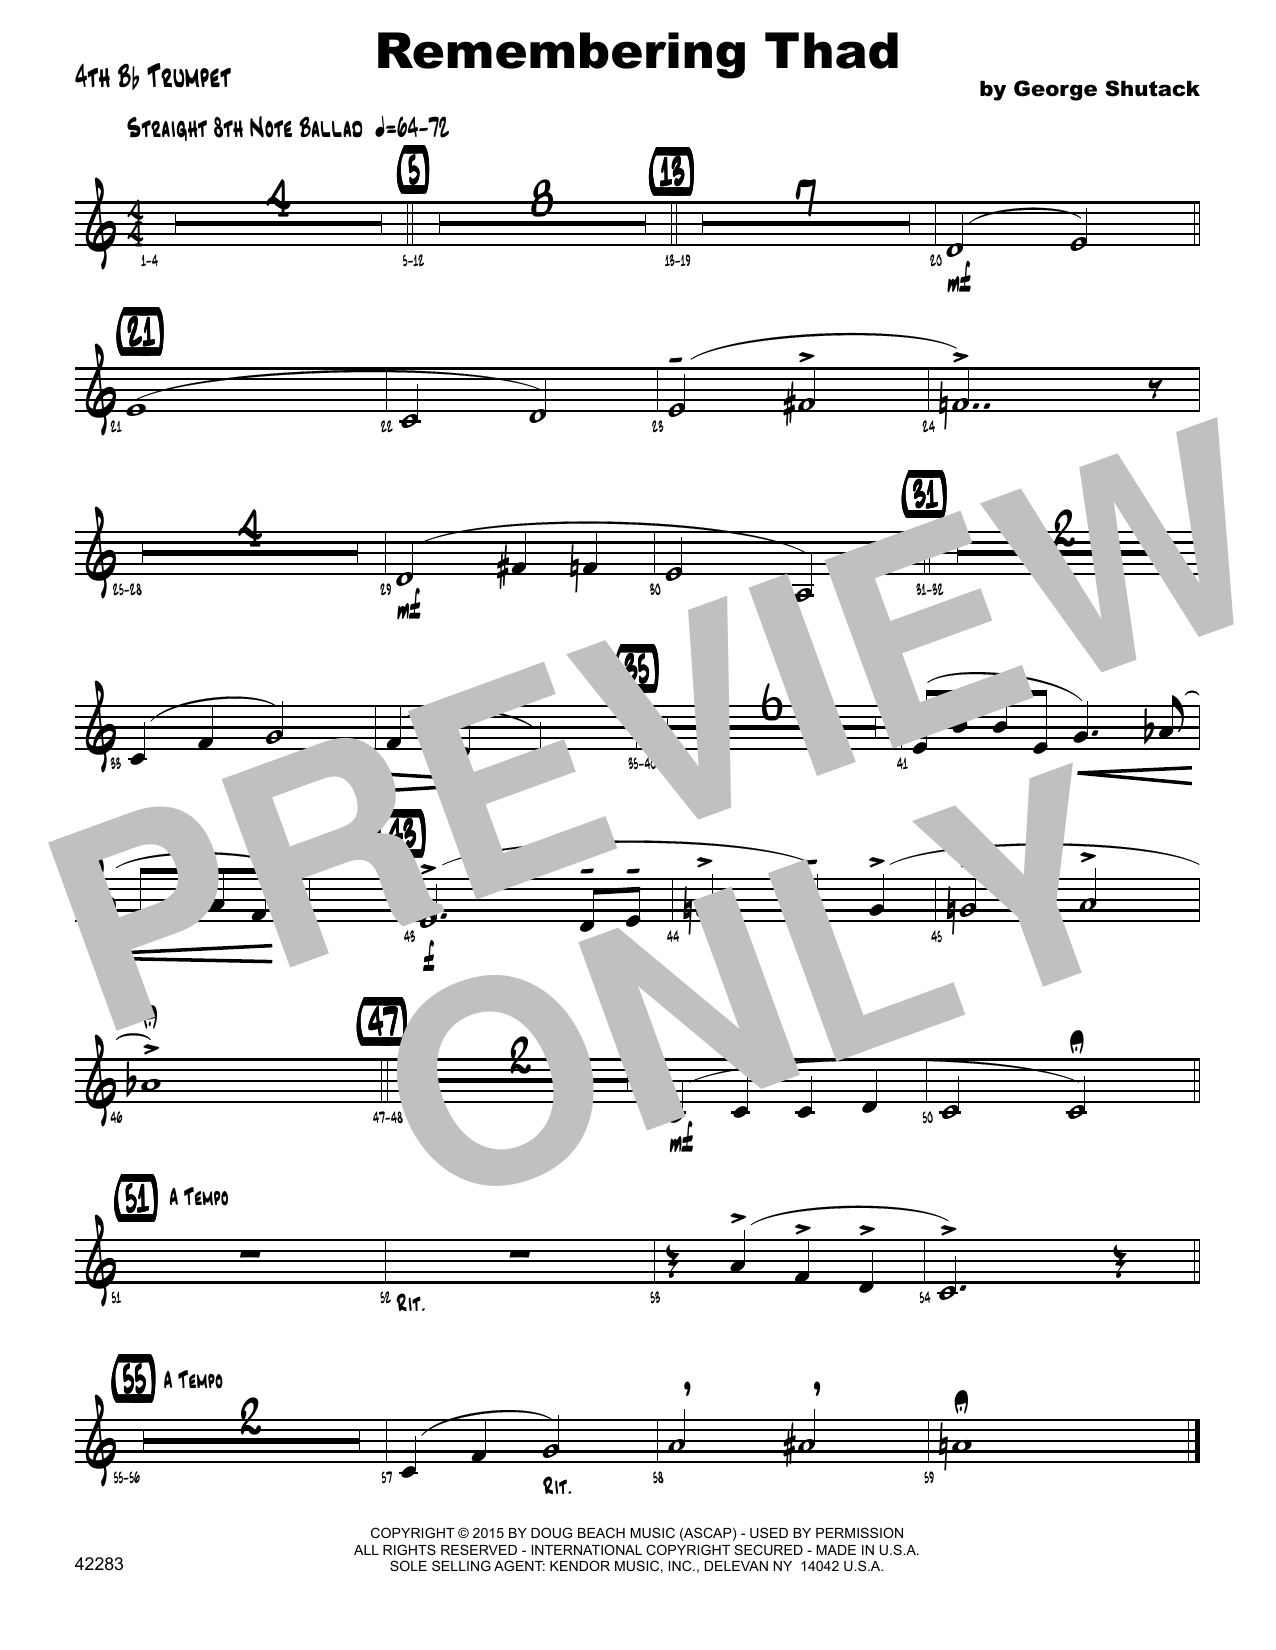 Download George Shutack Remembering Thad - 4th Bb Trumpet Sheet Music